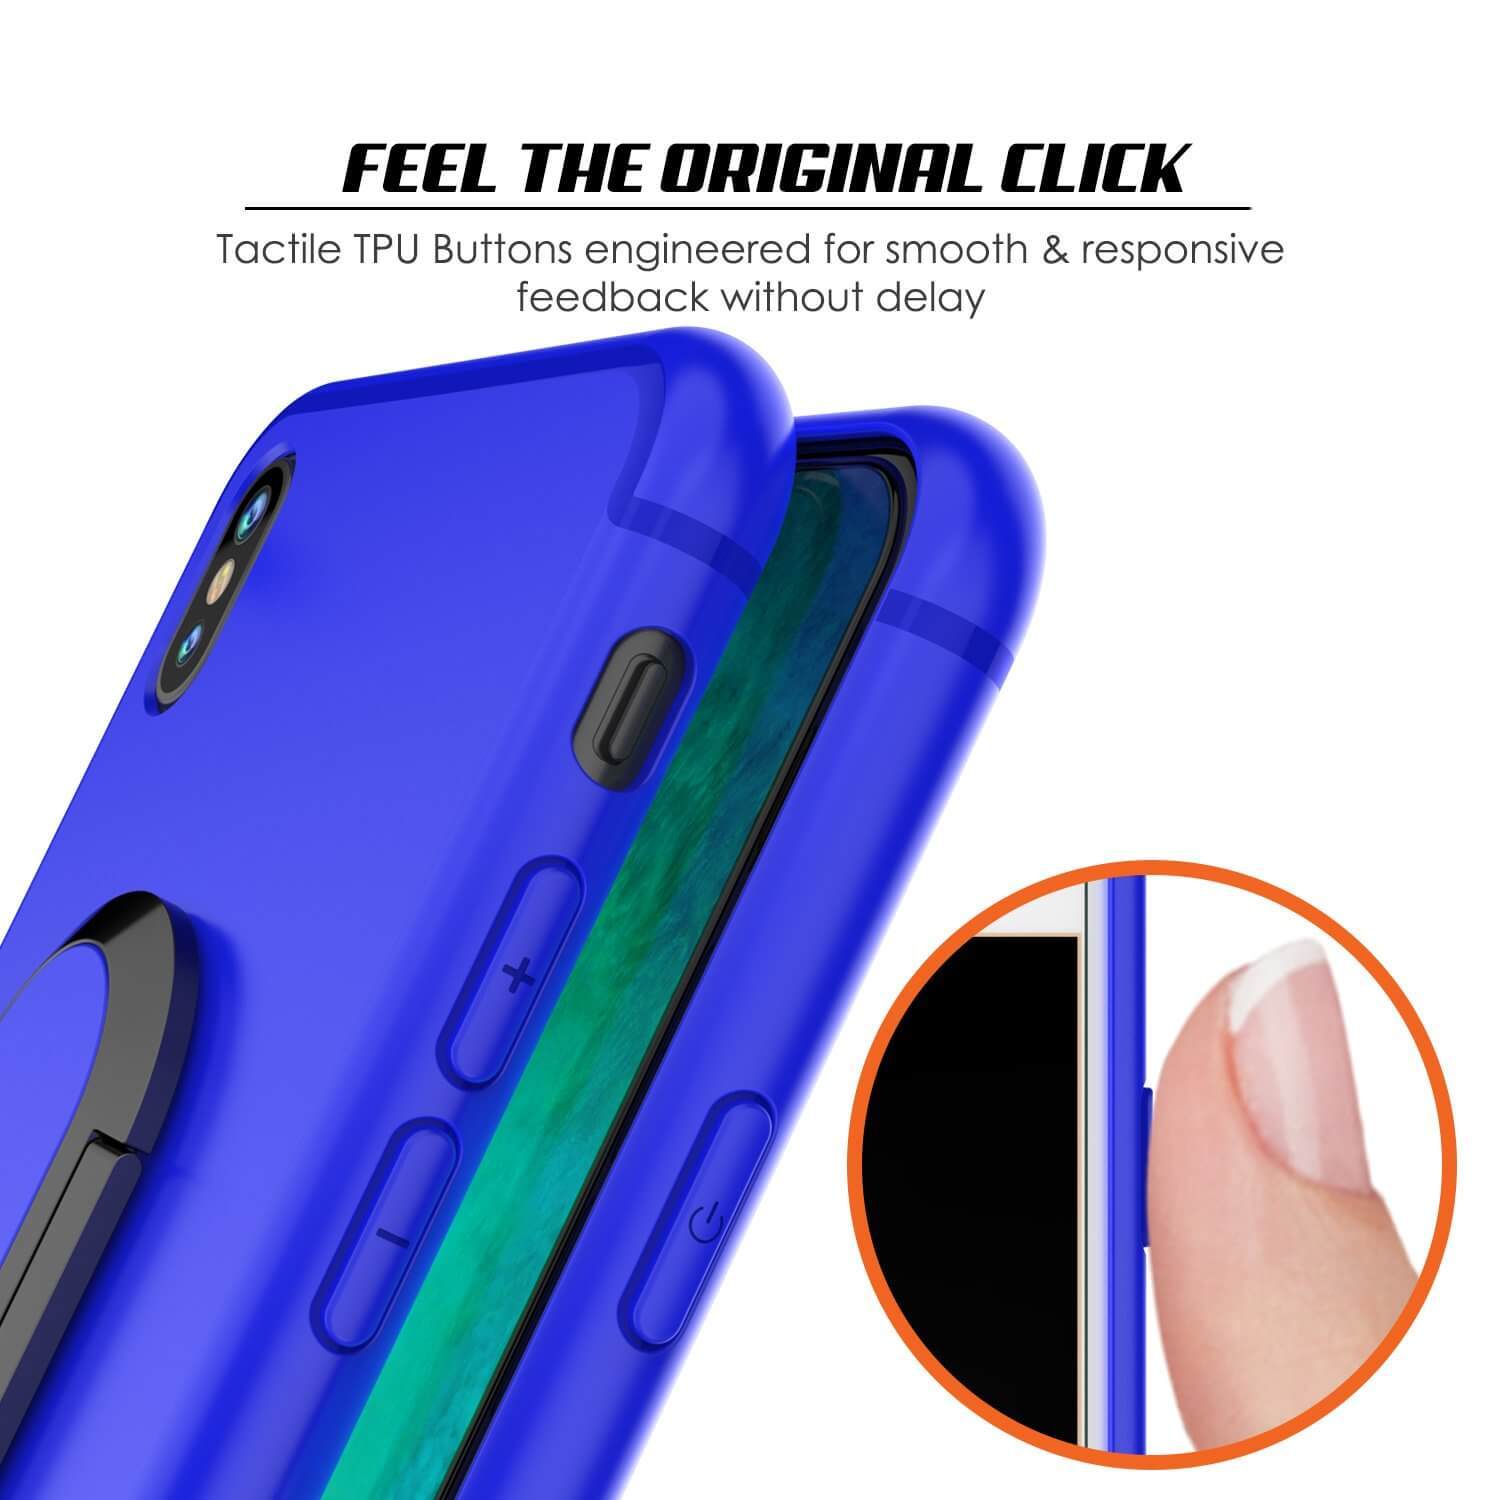 iPhone XS Case, Punkcase Magnetix Protective TPU Cover W/ Kickstand, Tempered Glass Screen Protector [Blue]